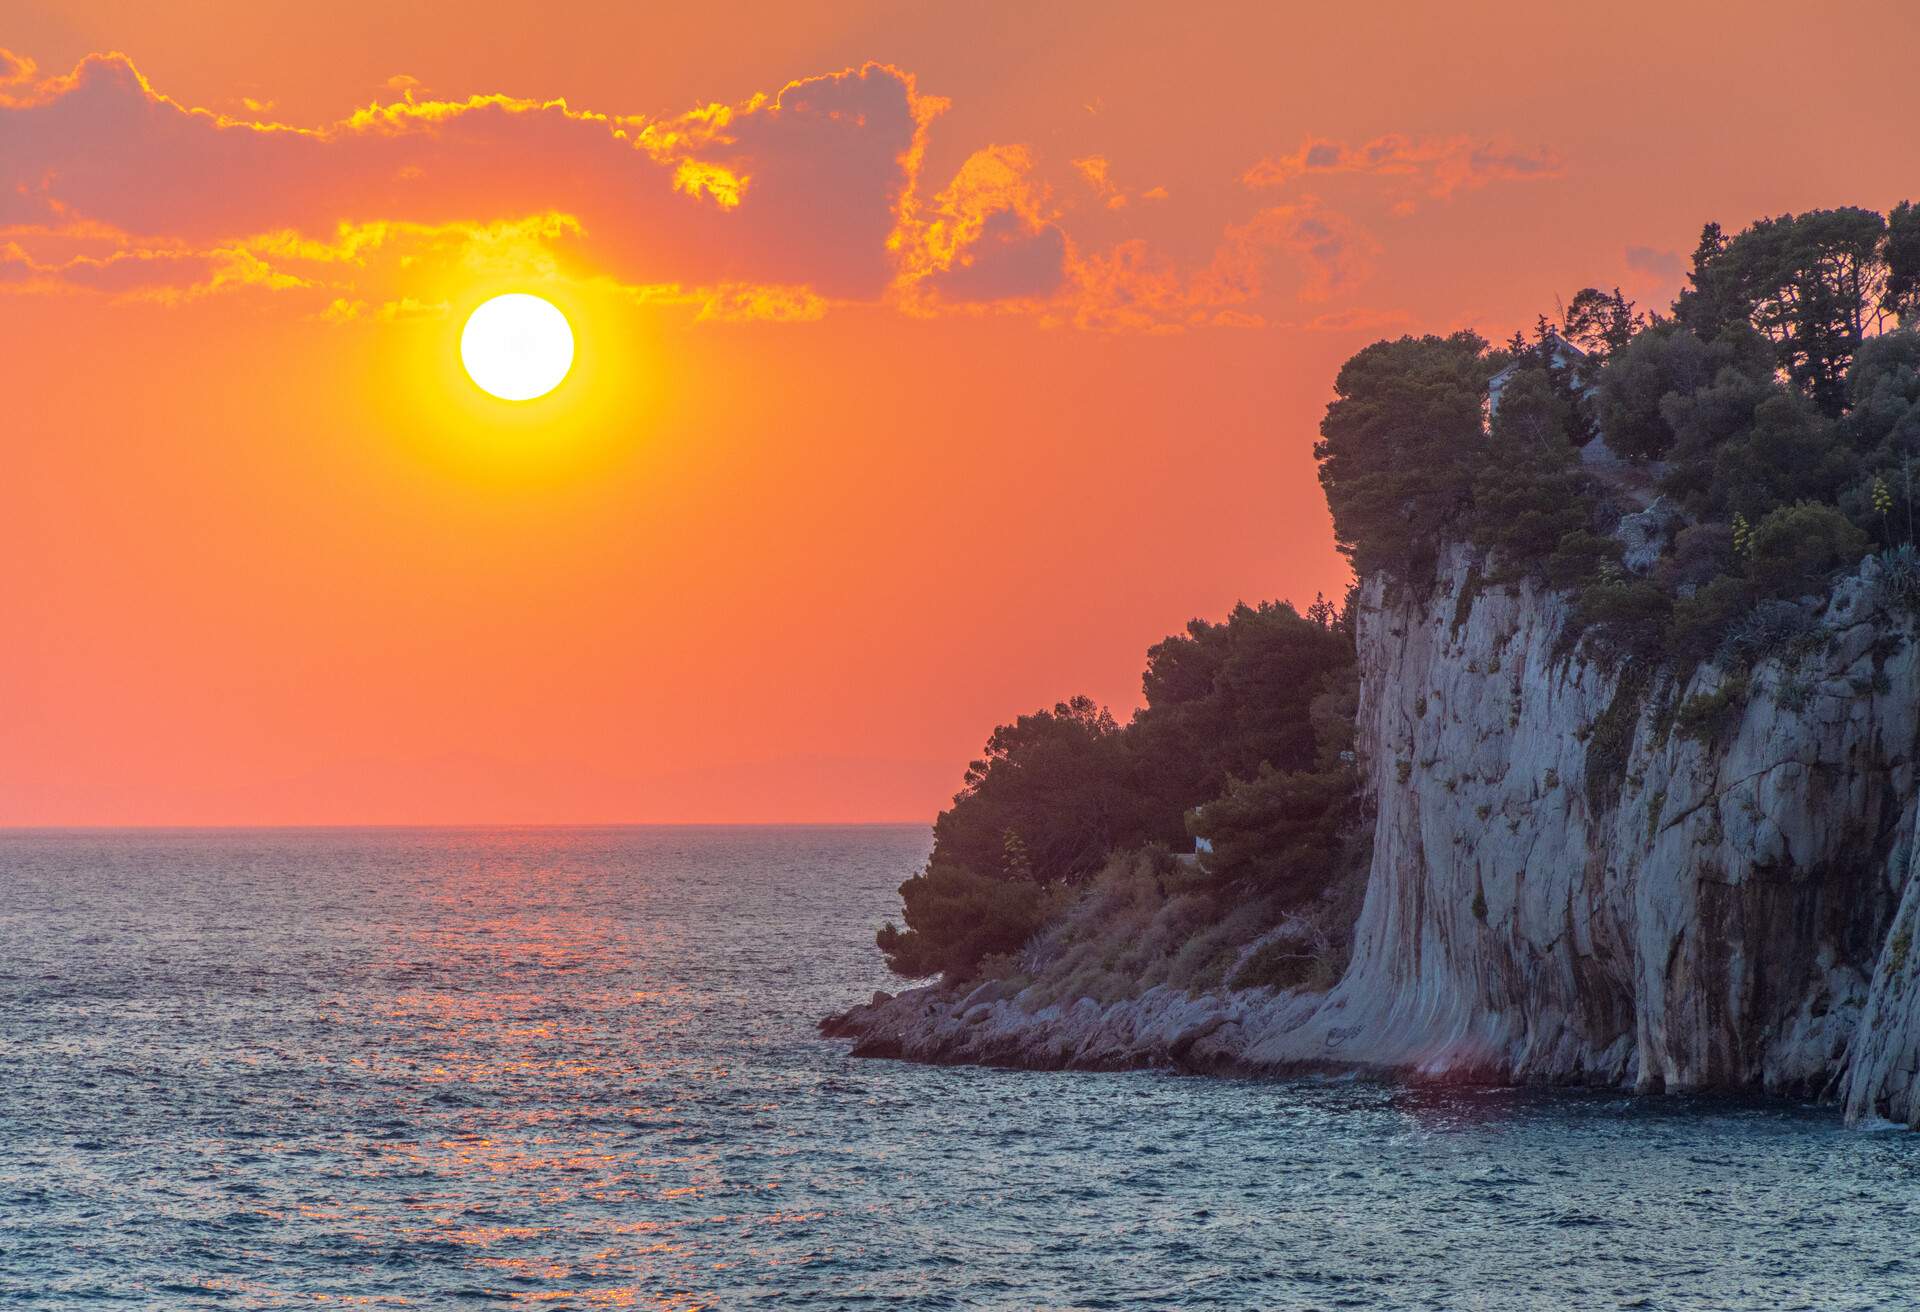 Sunset over the Adriatic sea, as seen from the Makarska Riviera, a 58km stretch of Adriatic coast at the foot of the Biokovo mountain range, in Split-Dalmatia County, southern Croatia.